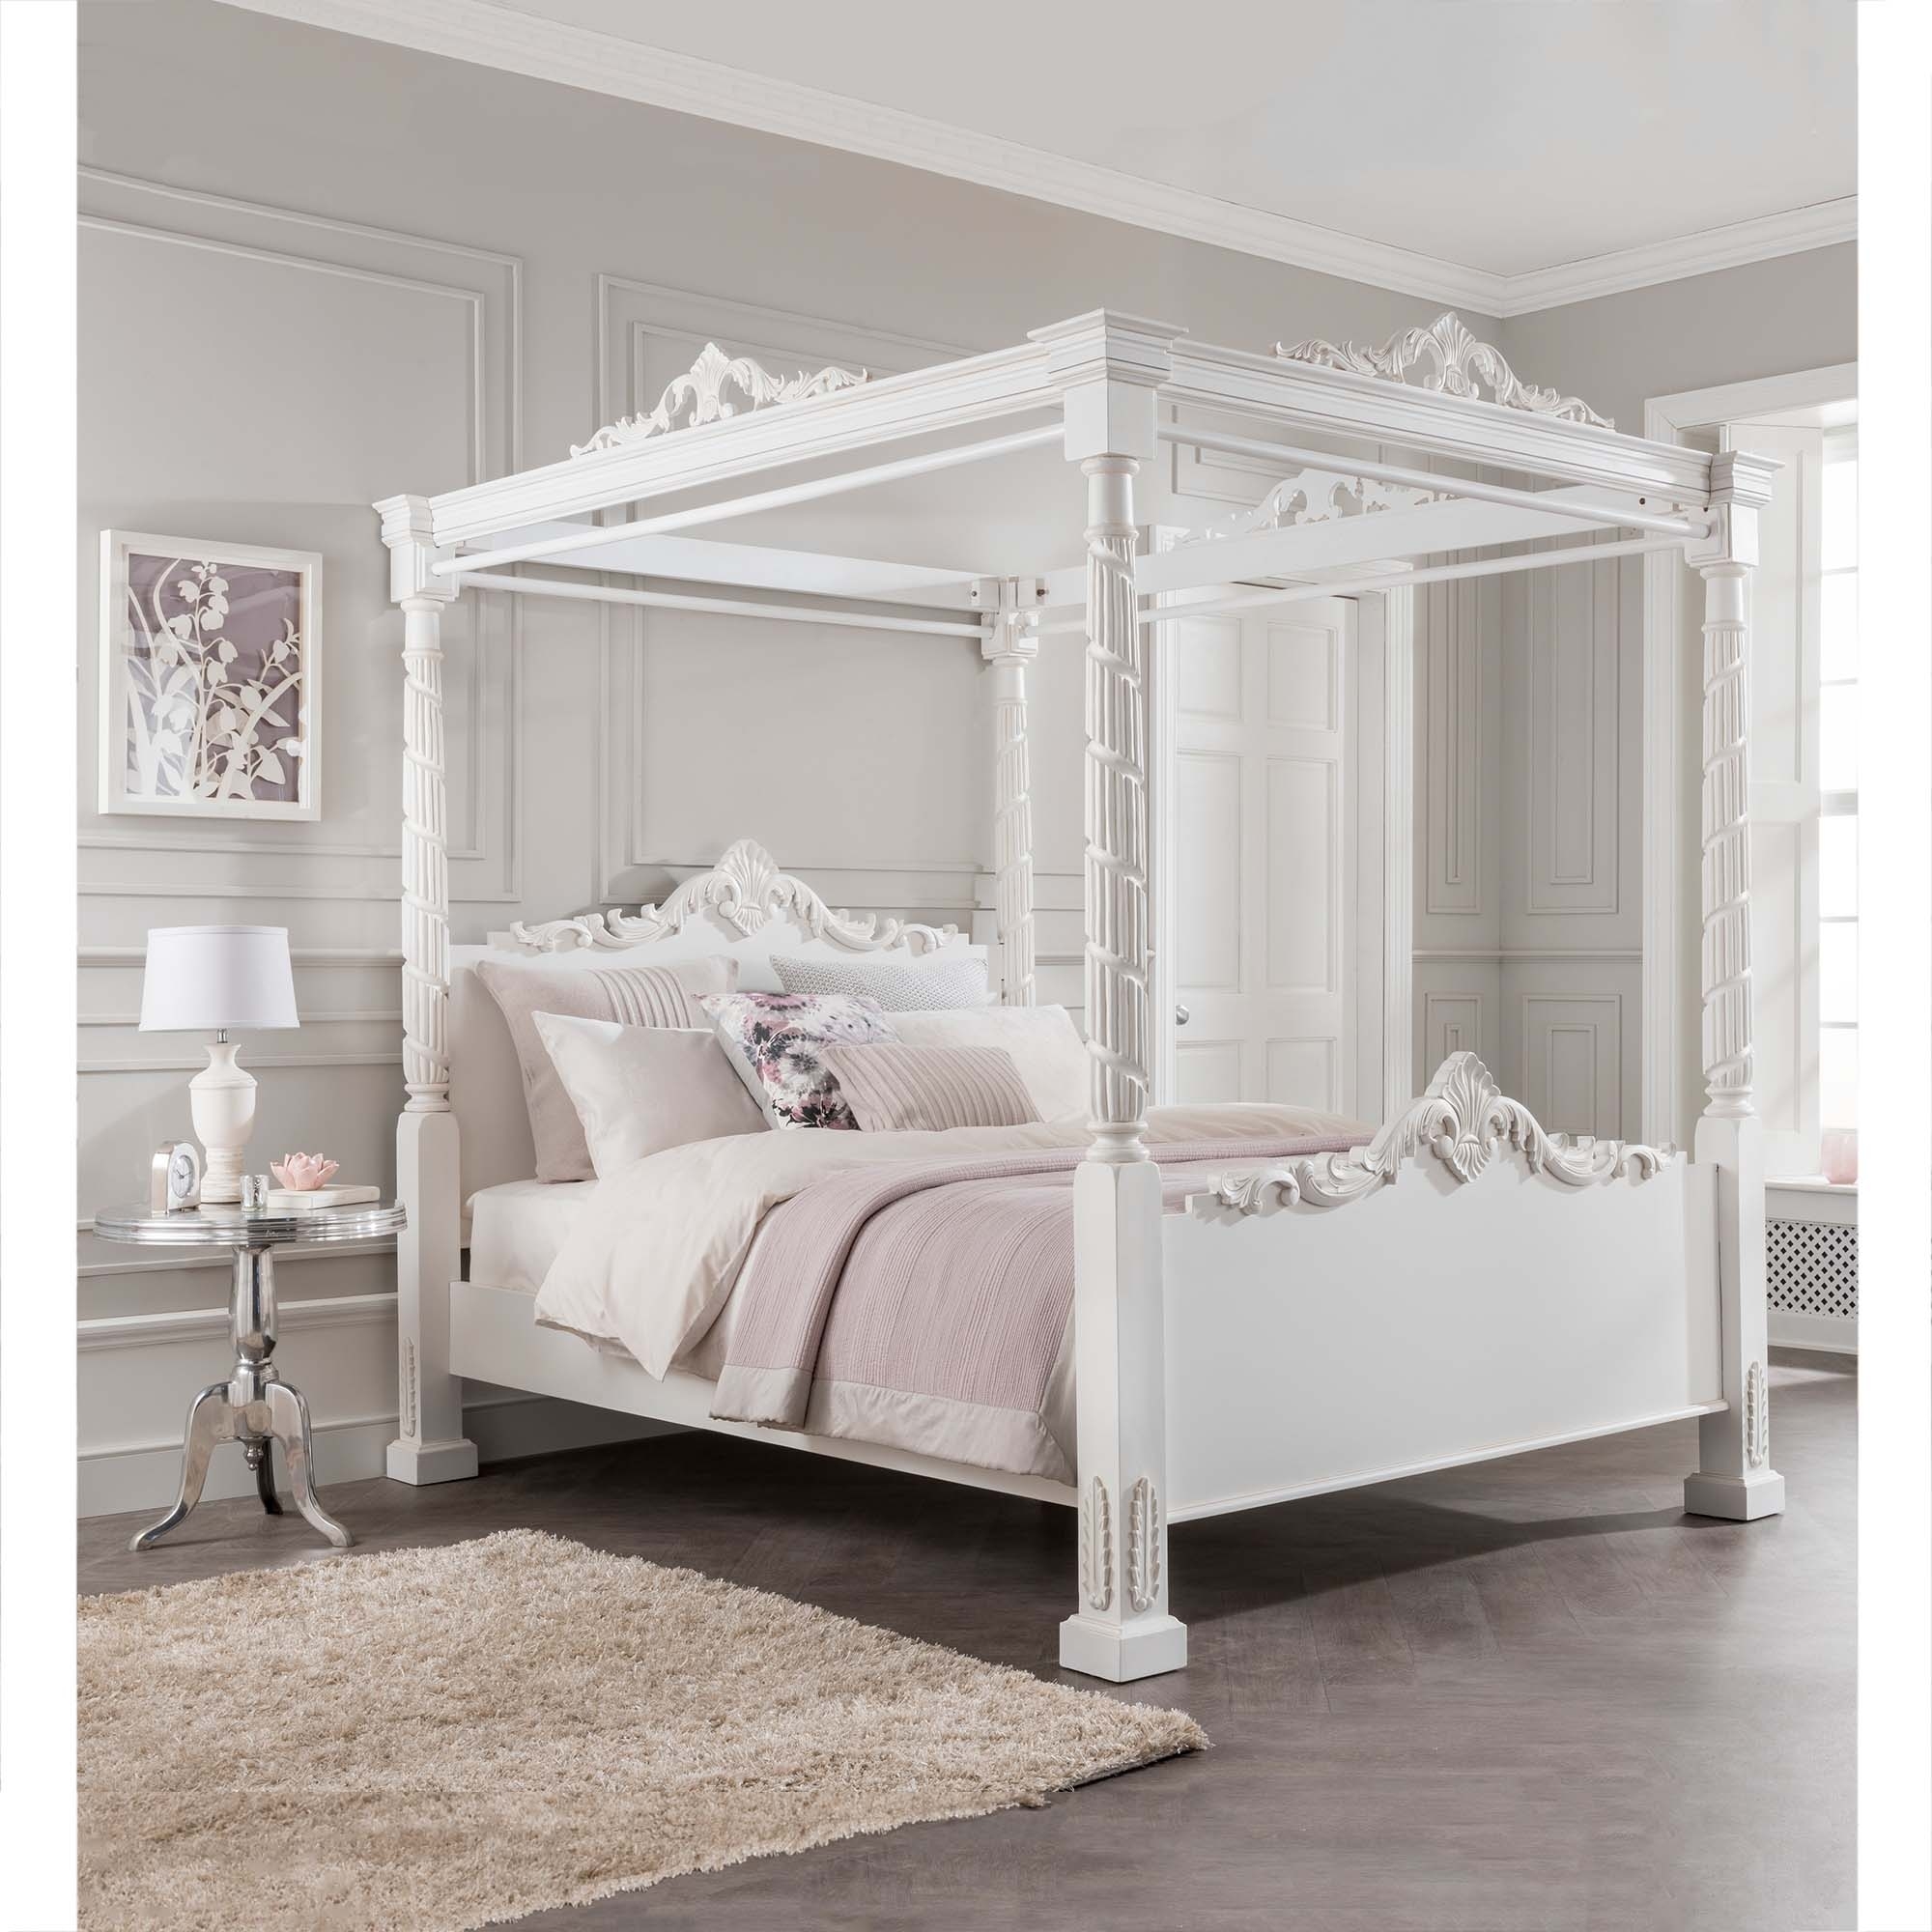 Garage beautiful four poster bed 2 lincoln antique french style p38353 30563 KCGIAUV